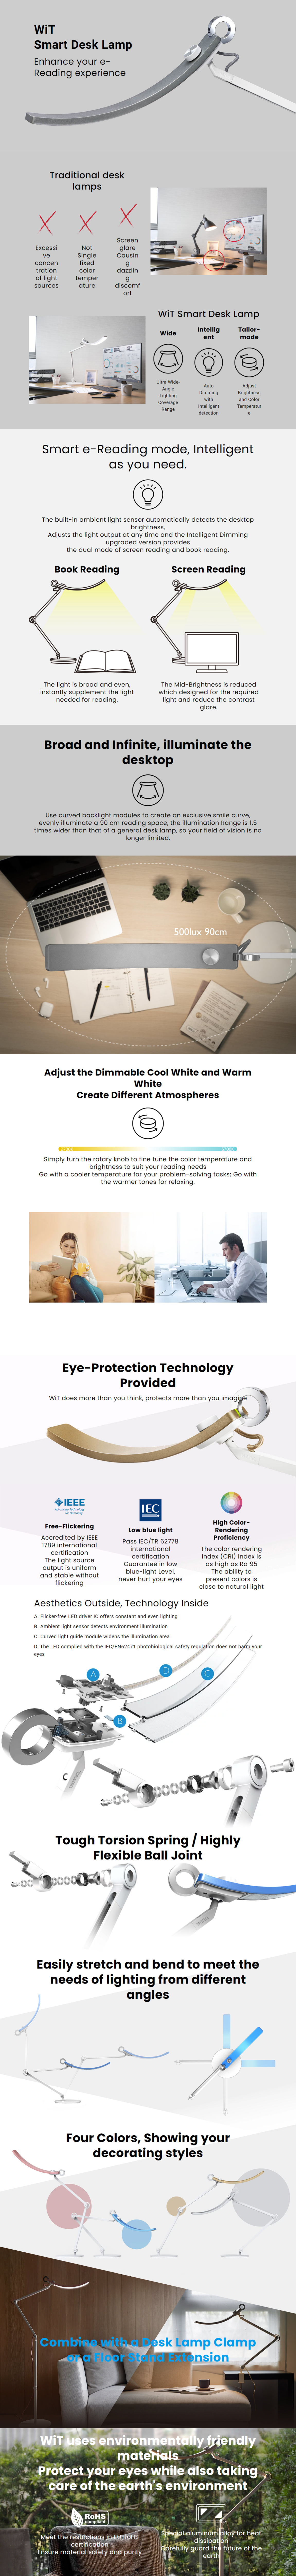 A large marketing image providing additional information about the product BenQ WiT eReading Desk Lamp - Snow Silver - Additional alt info not provided